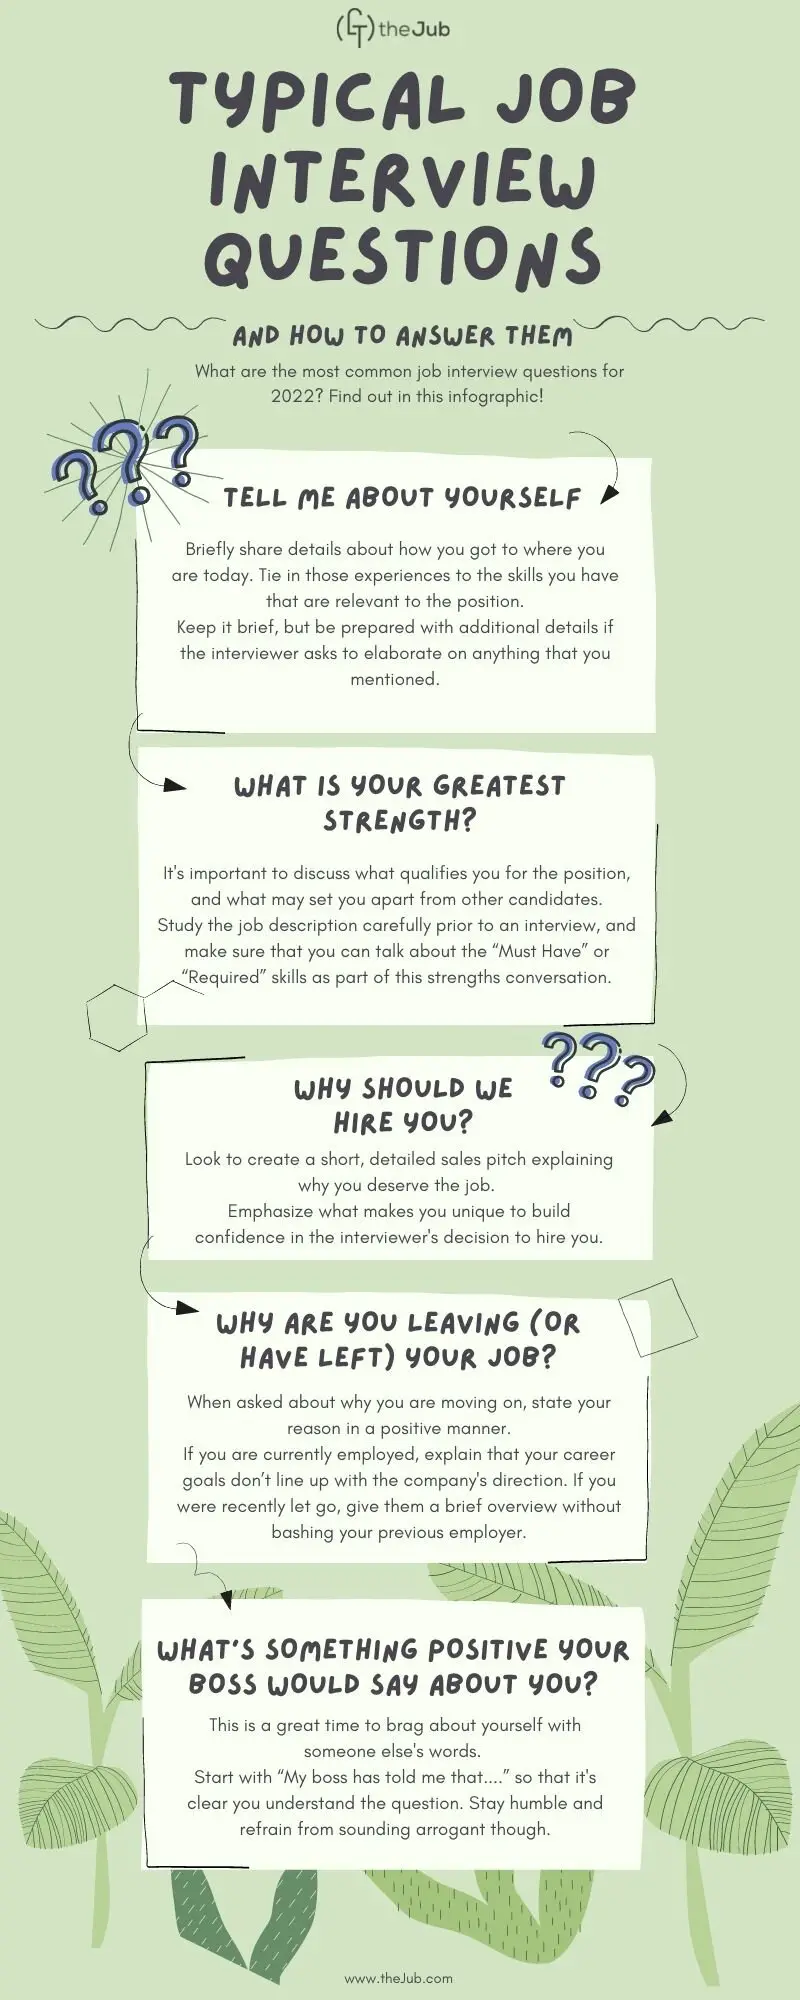 Answers to Common Job Interview Questions (Infographic)